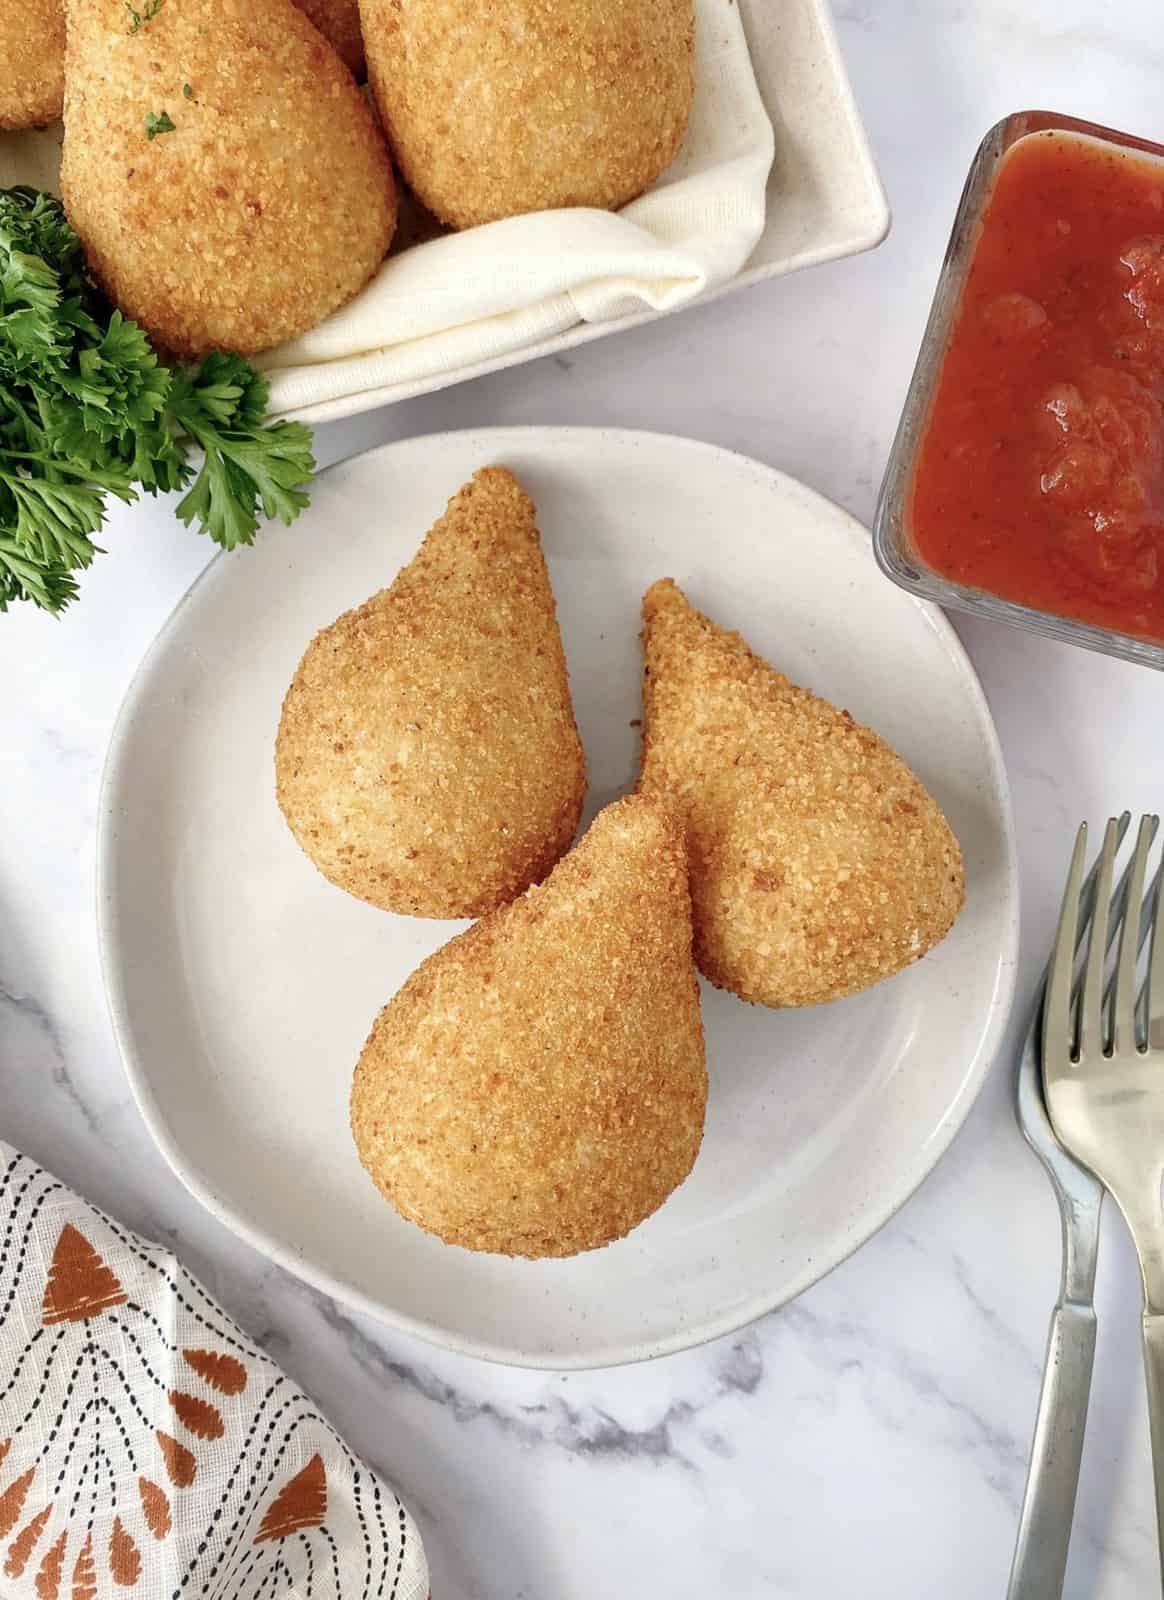 coxinha on a plate next to ketchup